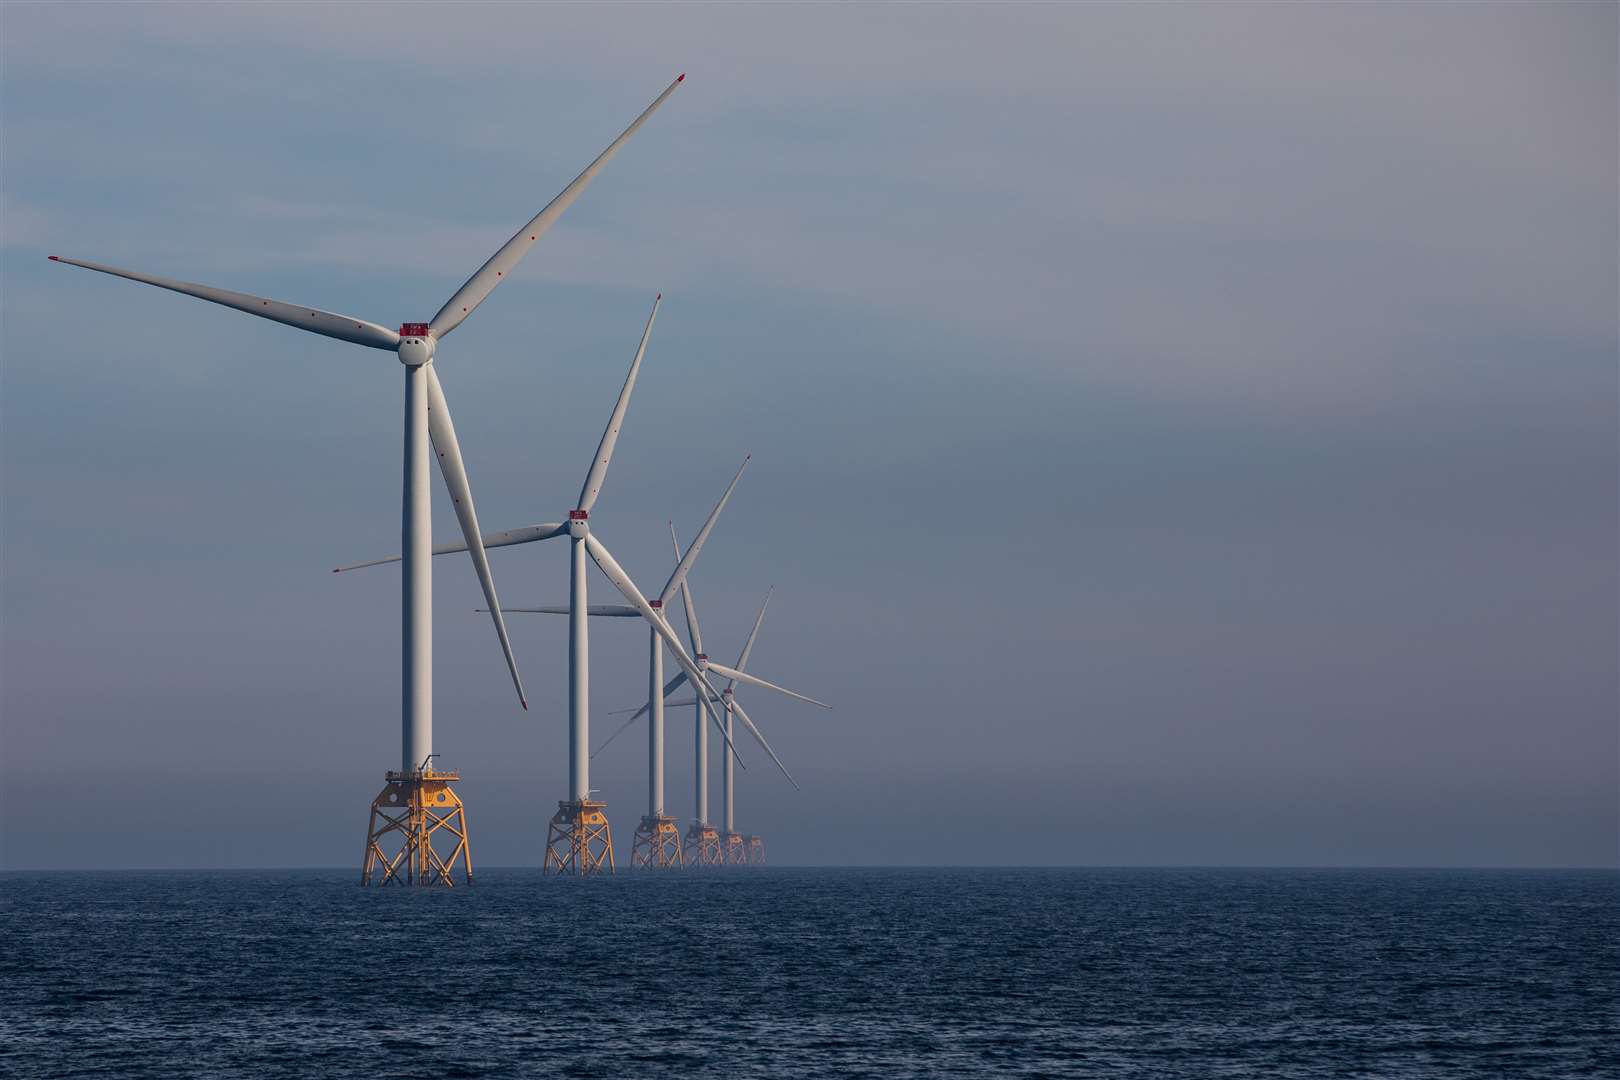 Moray is going to need new skills as Scotland moves over to more renewables like offshore wind.